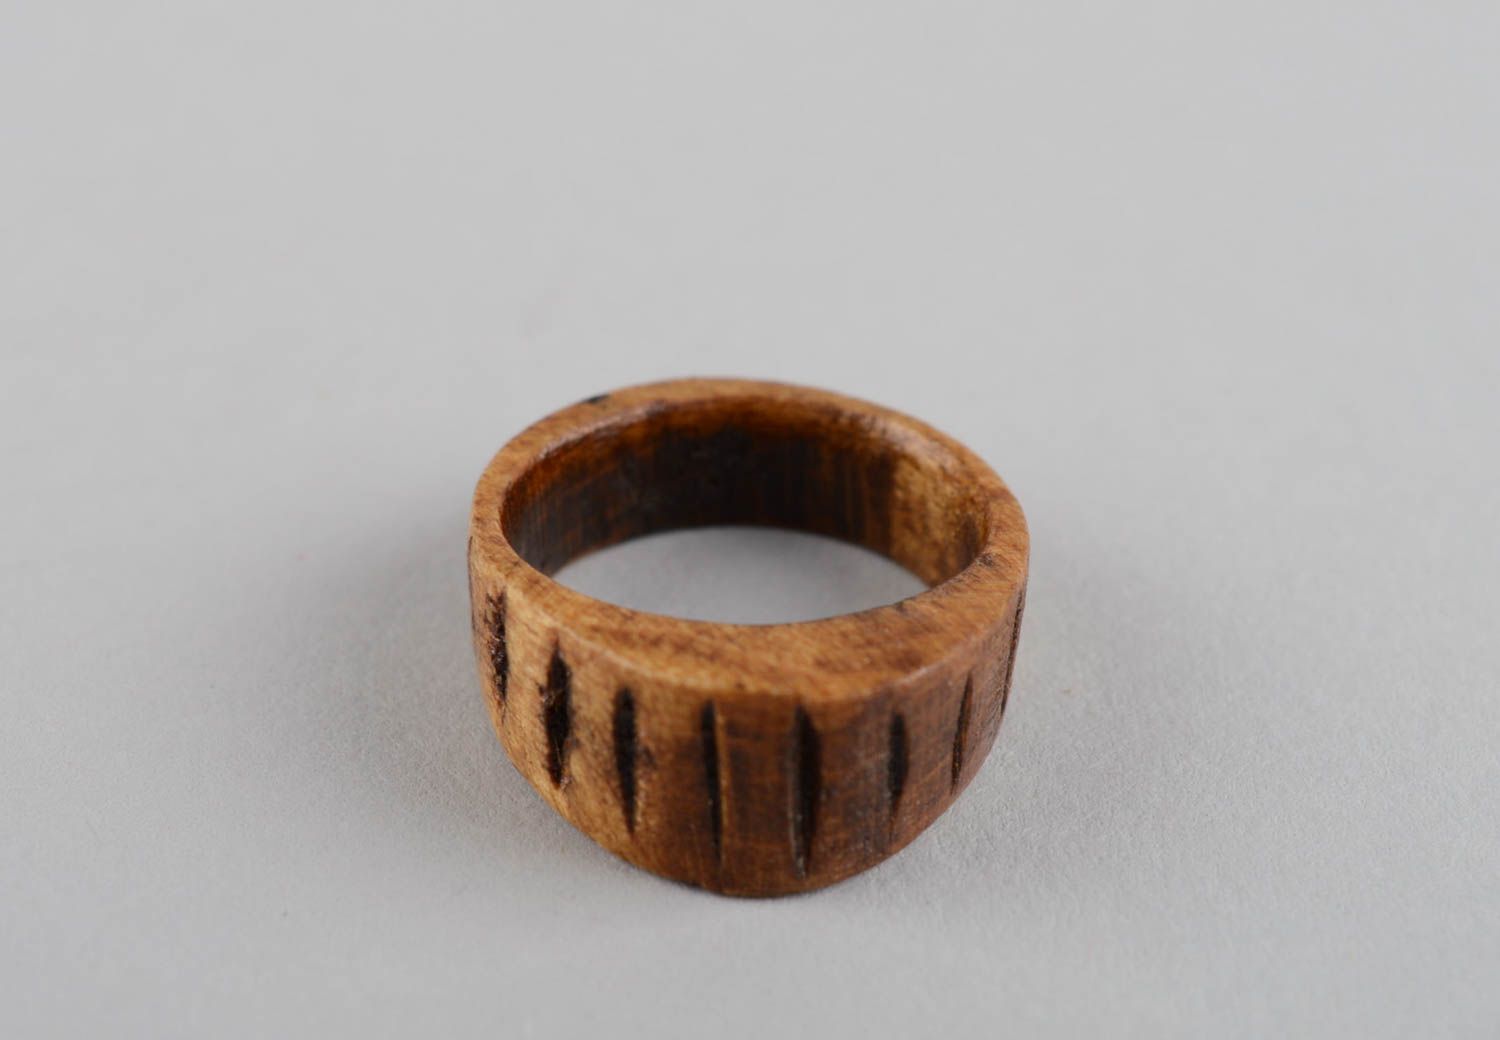 Unusual handmade wooden ring fashion accessories wood craft gifts for her photo 7